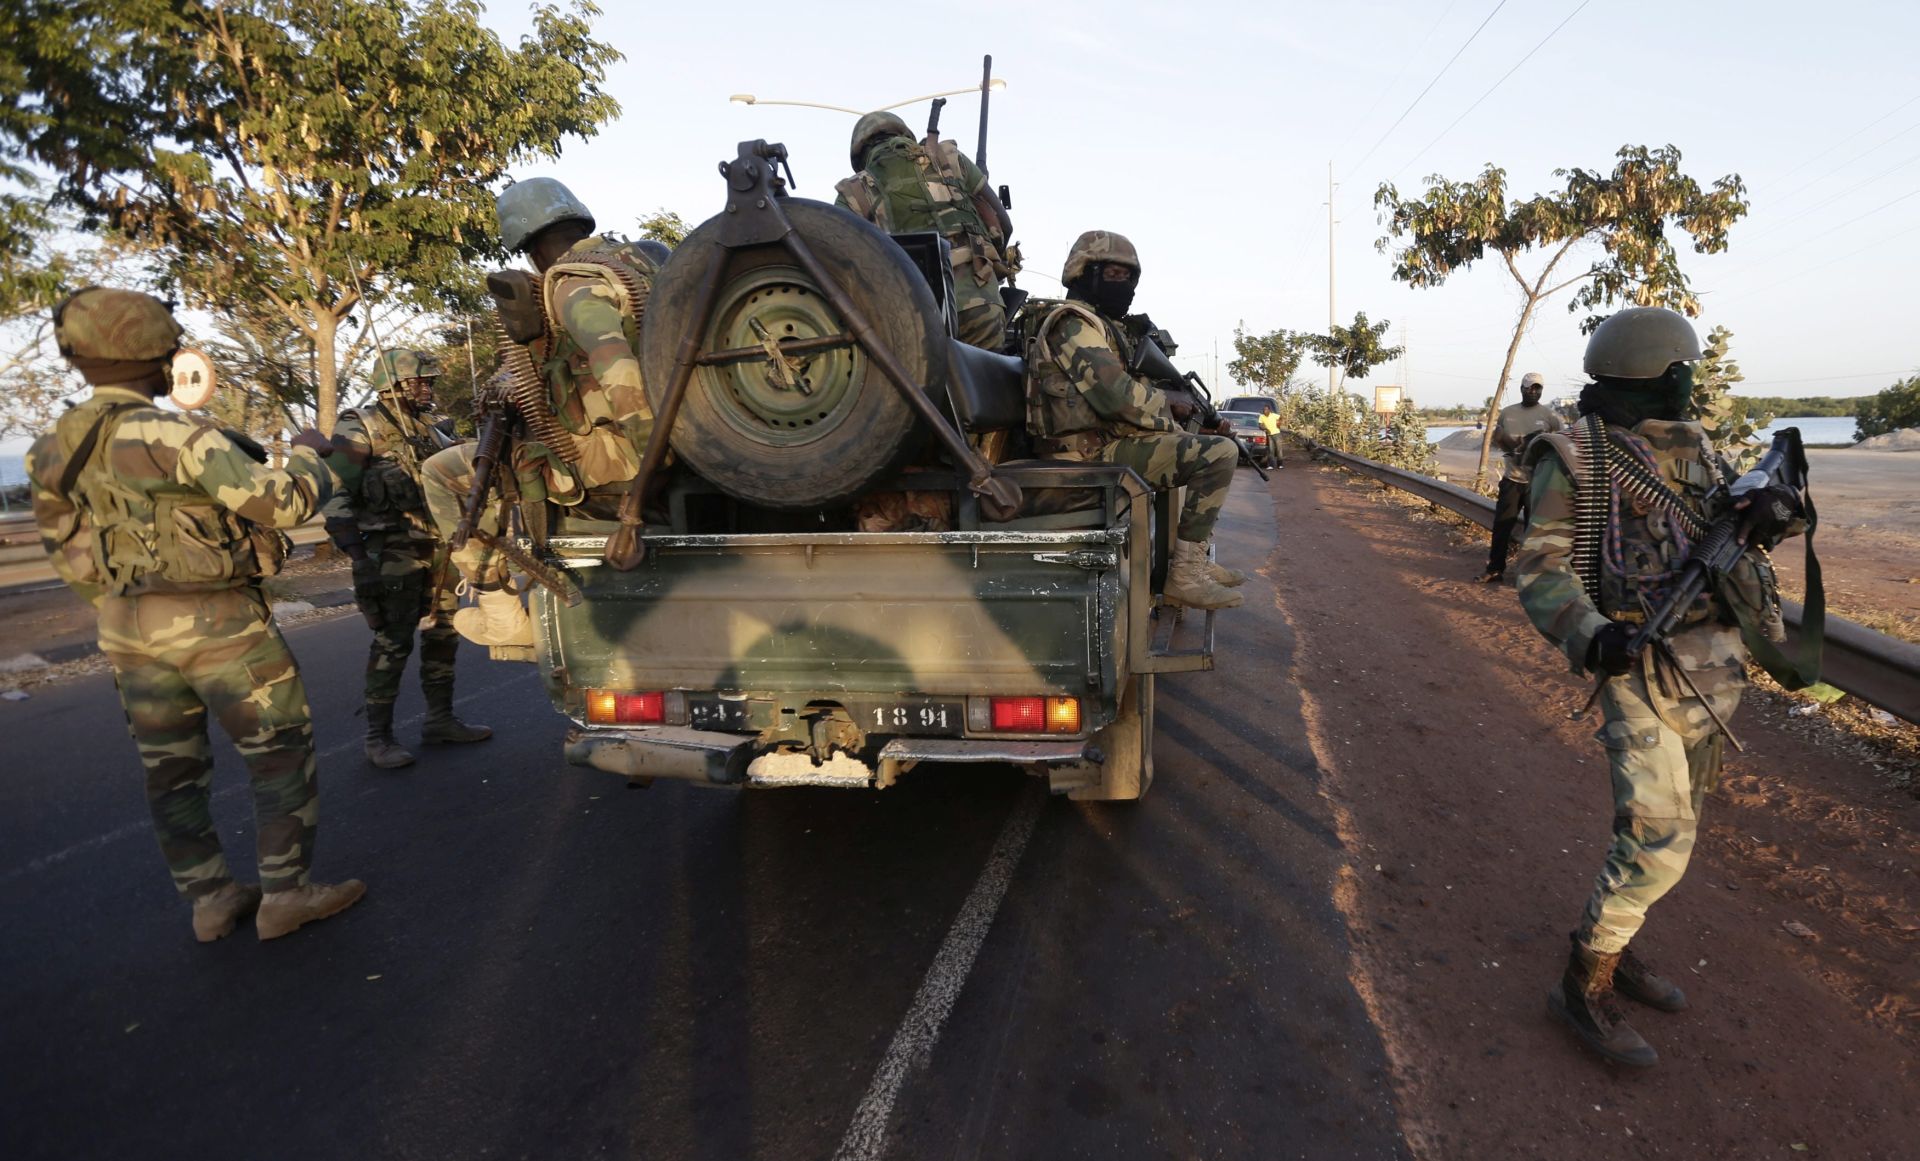 epa05742493 Senegalese soldiers patrol in Banjul, Gambia, 22 January 2017. Life is returning to normal on the streets of Banjul with the departure of ex president Yahya Jammeh who has been flown out of the country to exile in Equatorial Guinea, according to regional group Ecowas. Gambians await the arrival of President Adama Barrow who was sworn in as president of Gambia at the Gambia embassy in Dakar, Senegal, on 19 January 2017.  EPA/LEGNAN KOULA